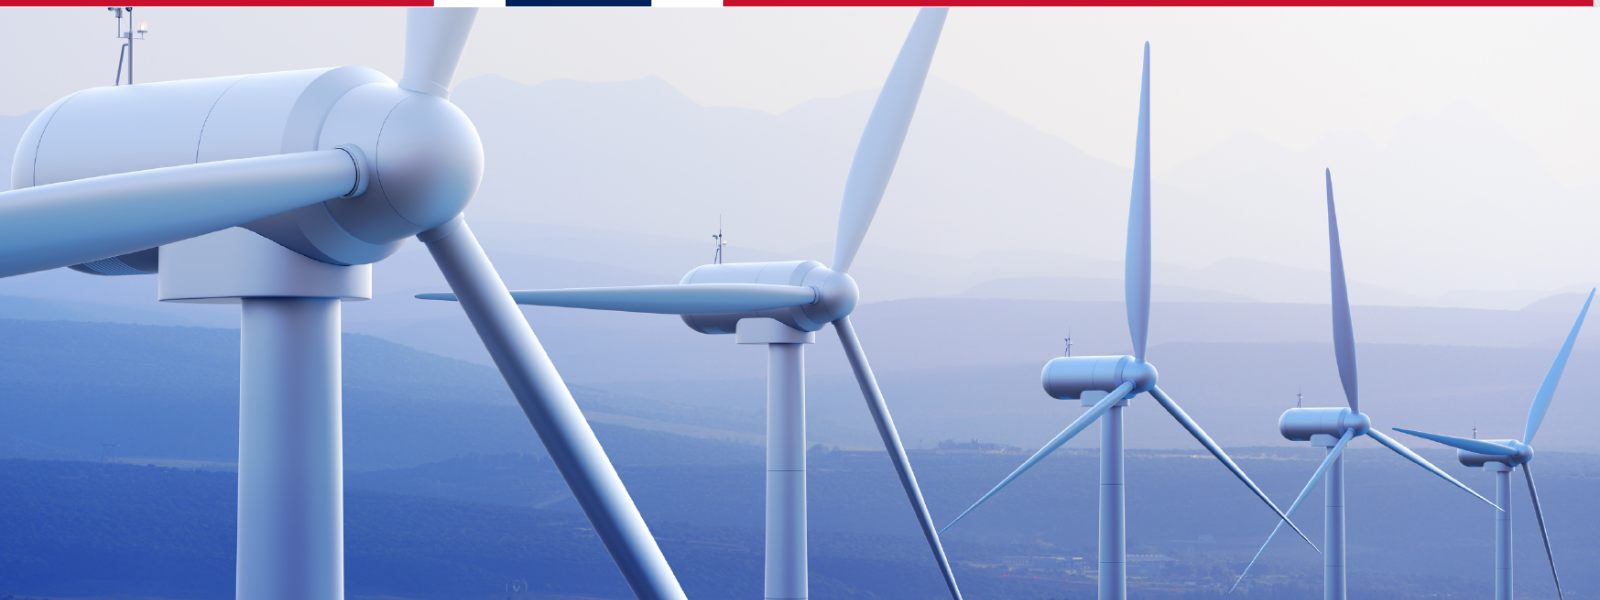 US Pacific Offshore Wind Summit & Power California Norwep